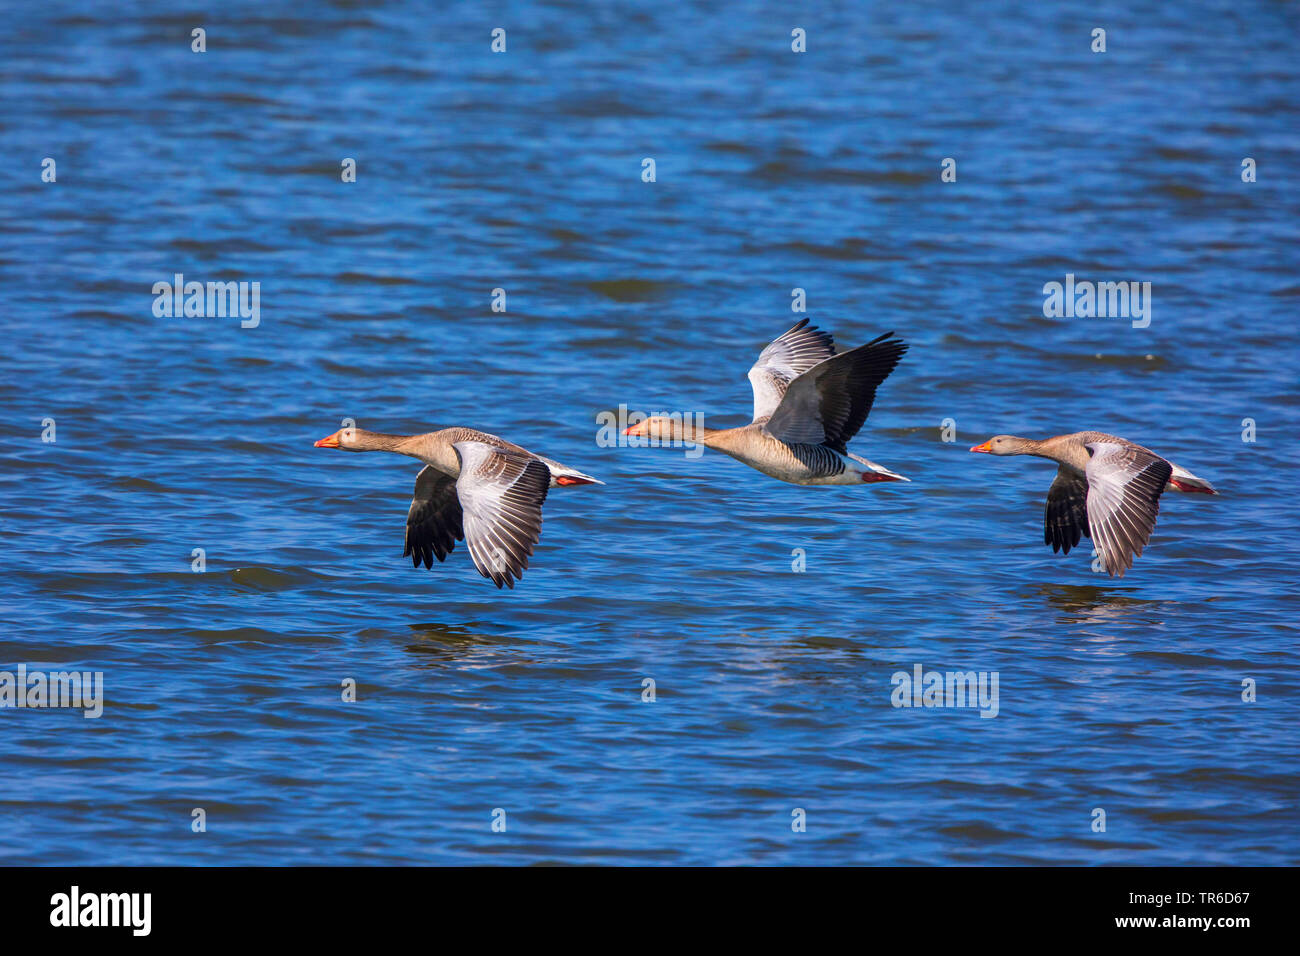 greylag goose (Anser anser), flying over water, Germany, Bavaria, Lake Chiemsee Stock Photo